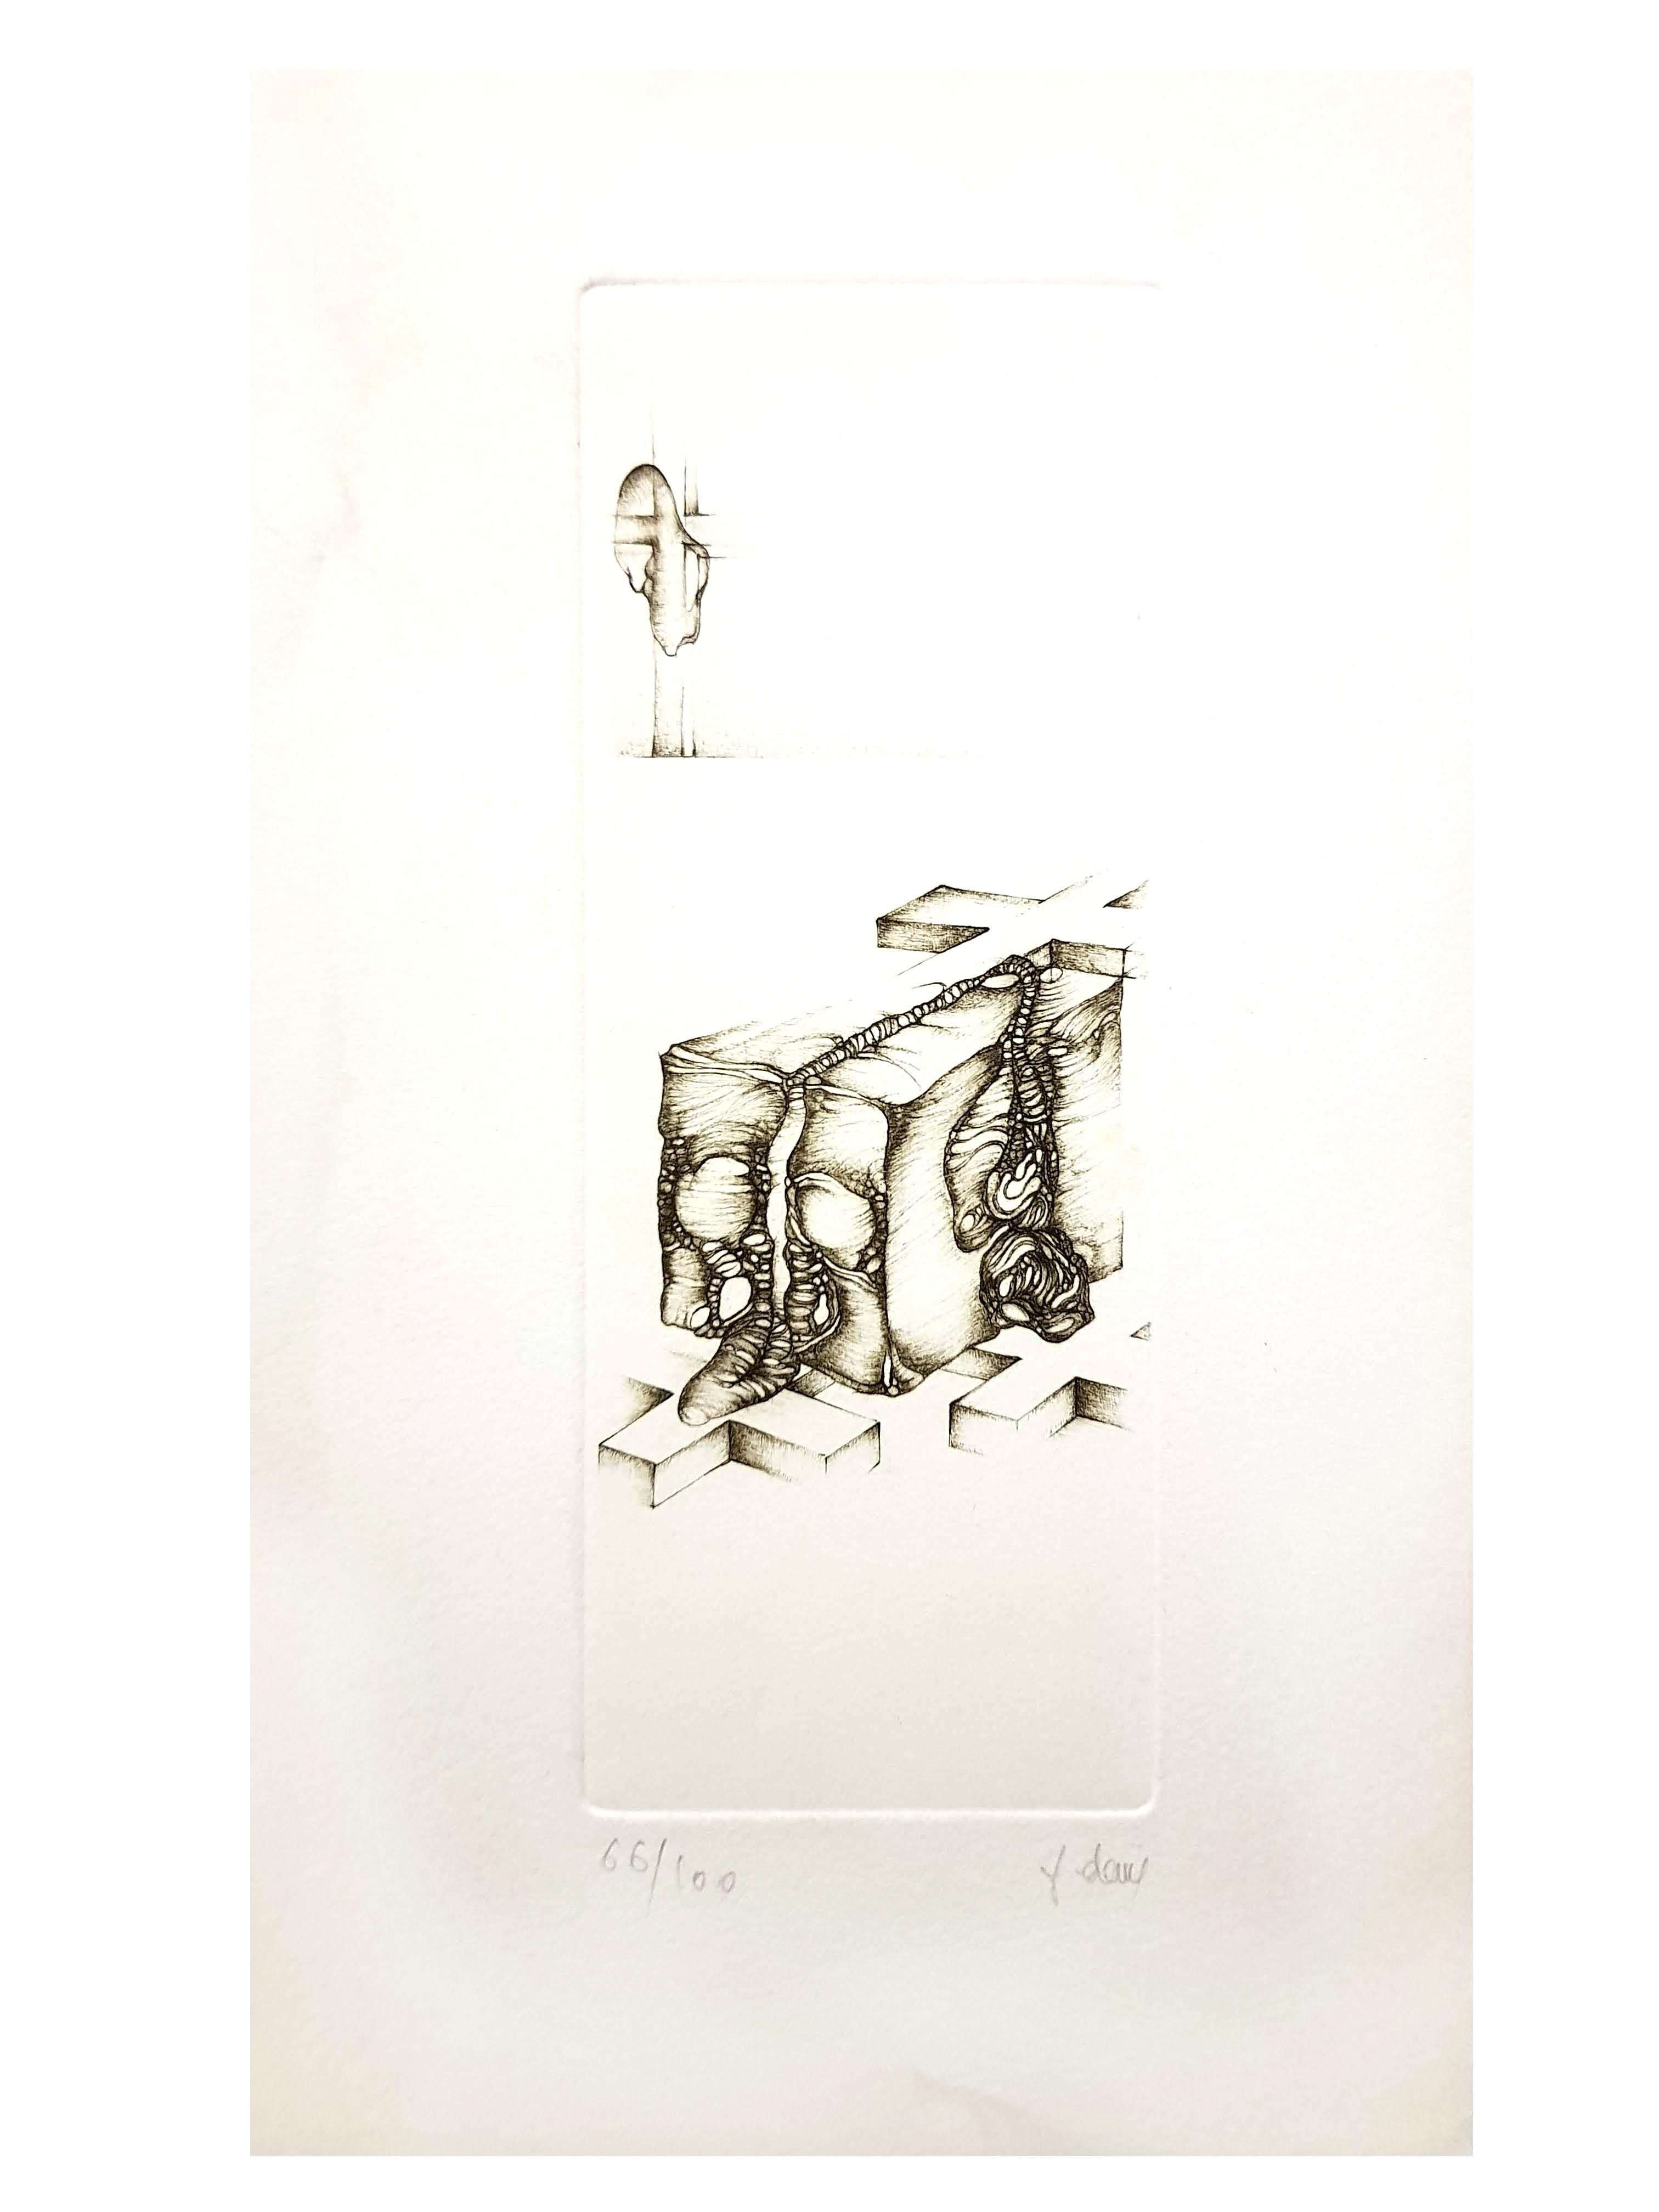 Fred Deux - Grey IV - Signed Original Etching
Signed and Numbered 
Edition of 100
Dimensions: 24 x 14 cm

Fred Deux

Fred Deux, illustrator, oral poet, writer, and, under the pseudonym Jean Douassot, author of a cult book, La Gana, was a singular